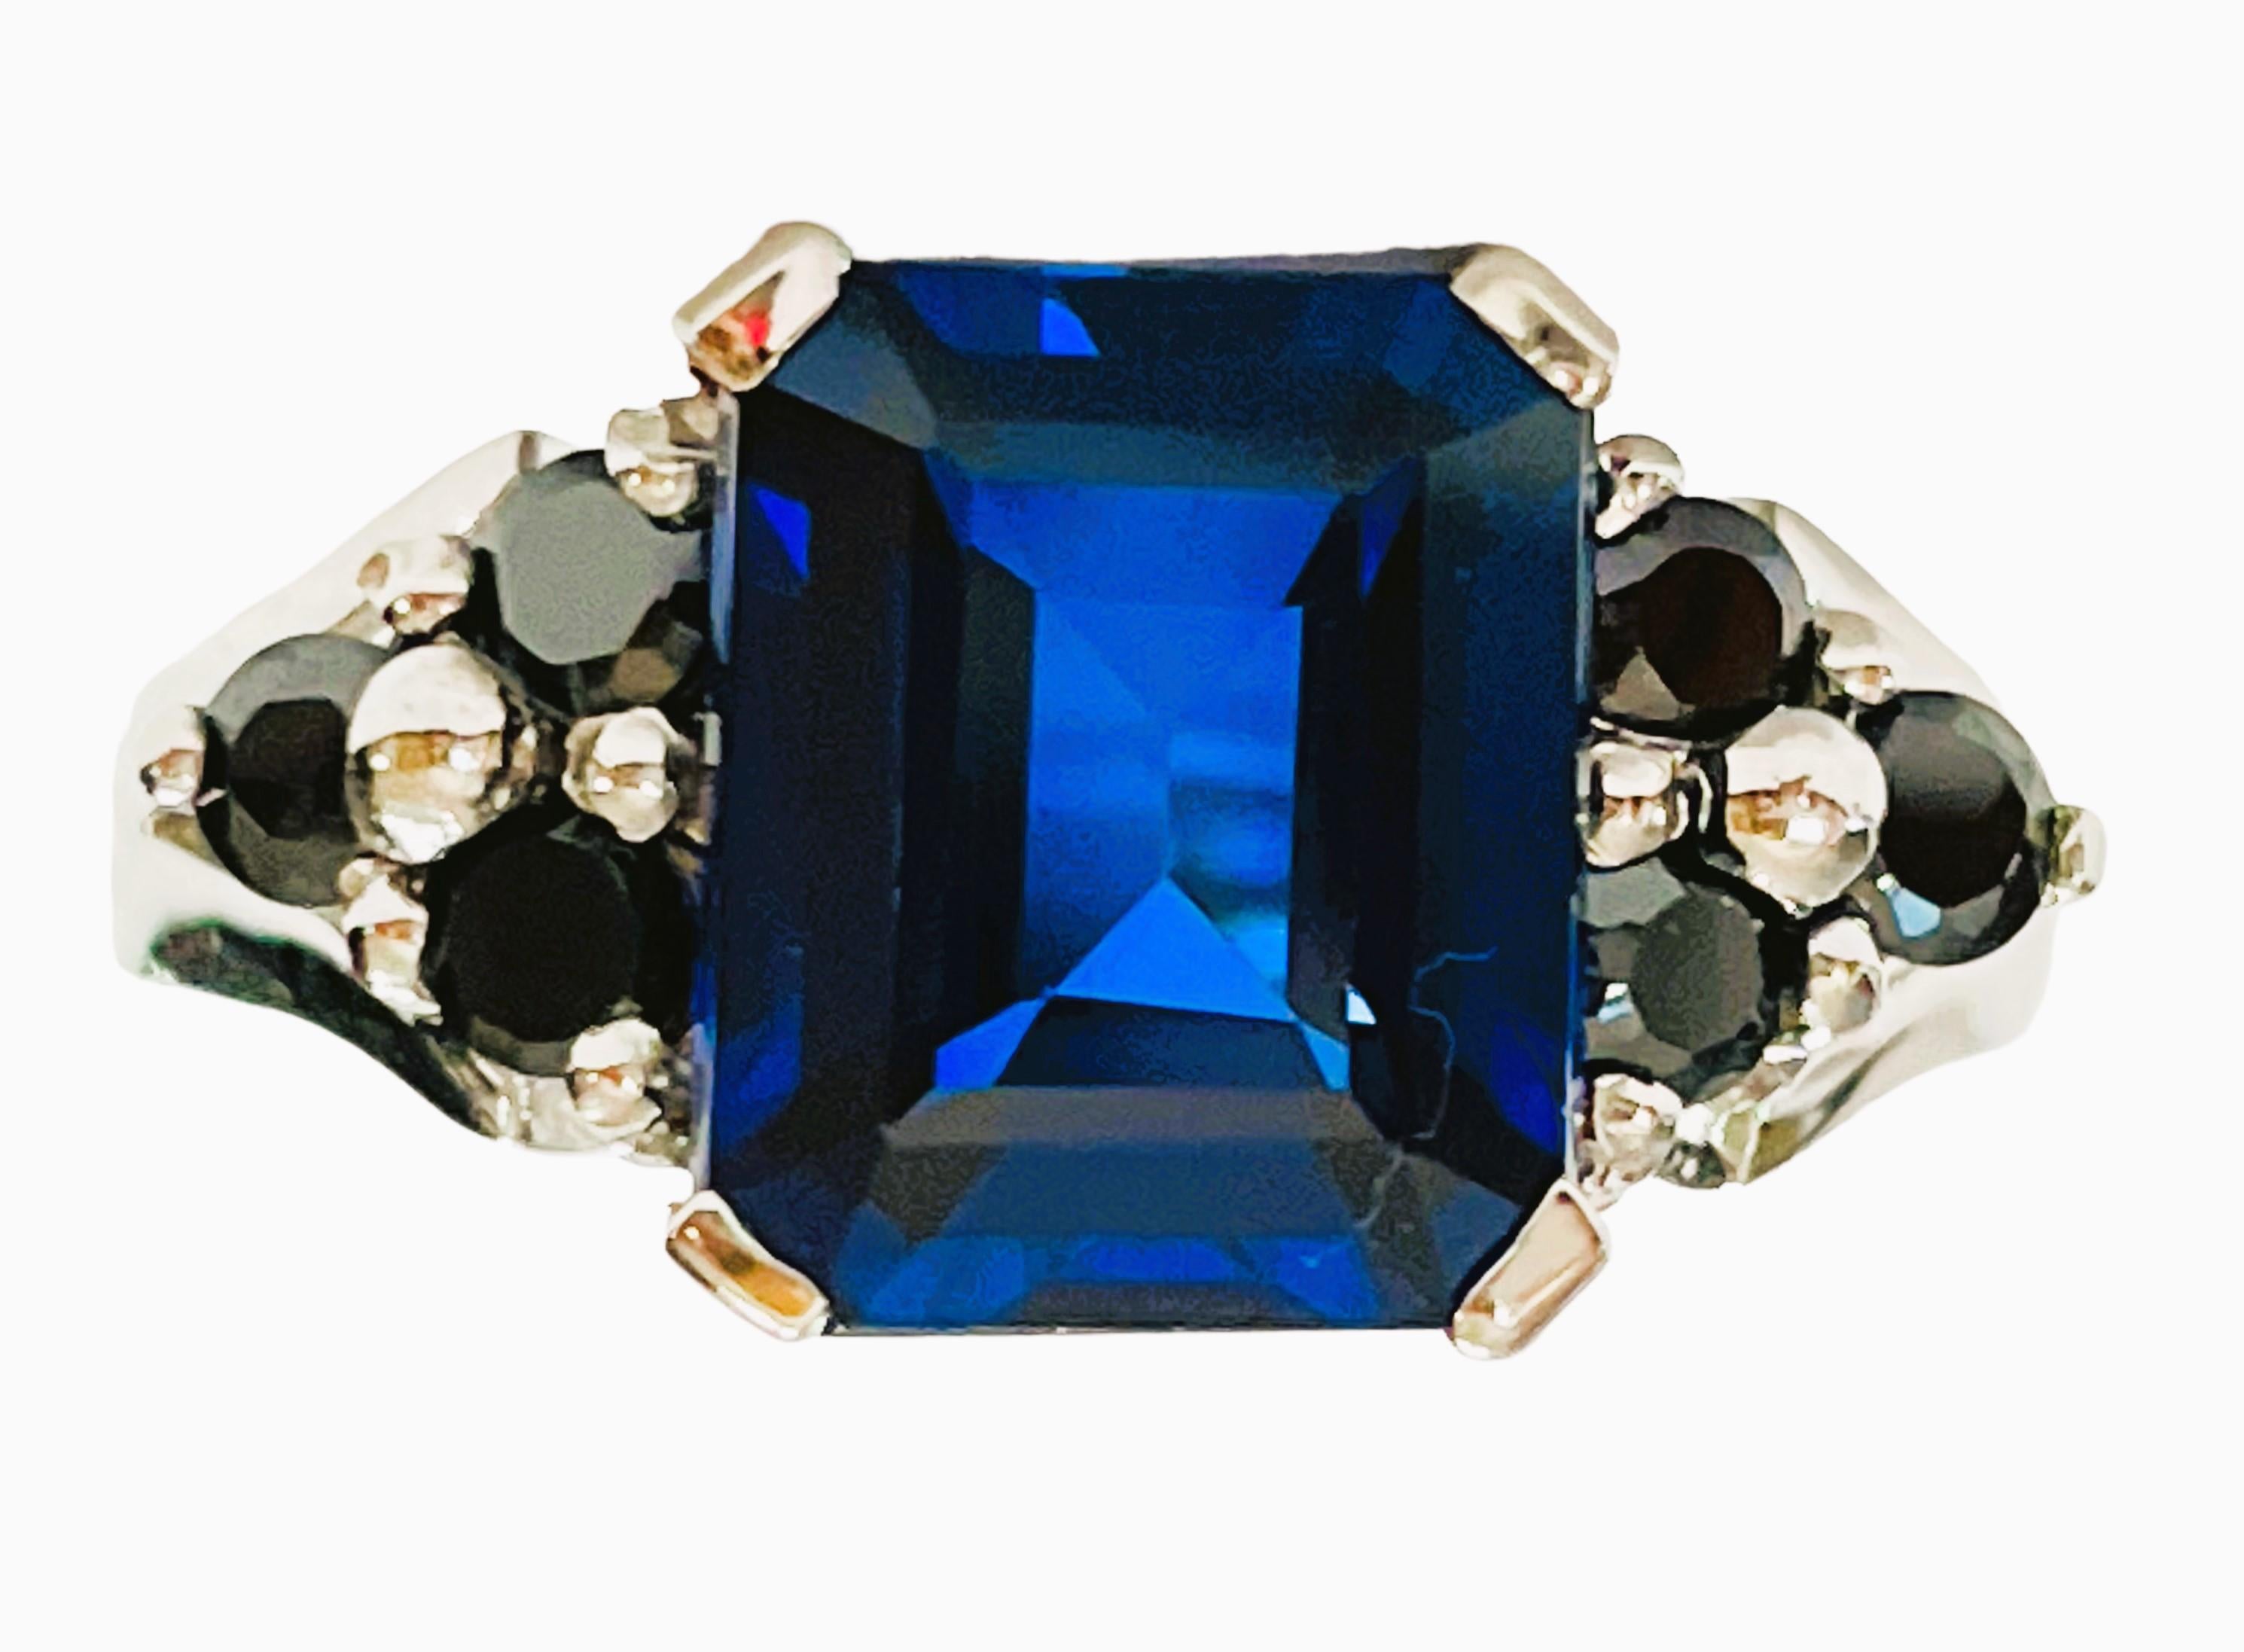 The ring is a size 7.5. It was mined in Africa and is just exquisite. It is a highly rated IF (Internally Flawless) stone.  A very high quality stone. It is a Asscher cut stone and is 3.90 Cts.   The main stone is 9 x 8.7 mm and is surrounded by